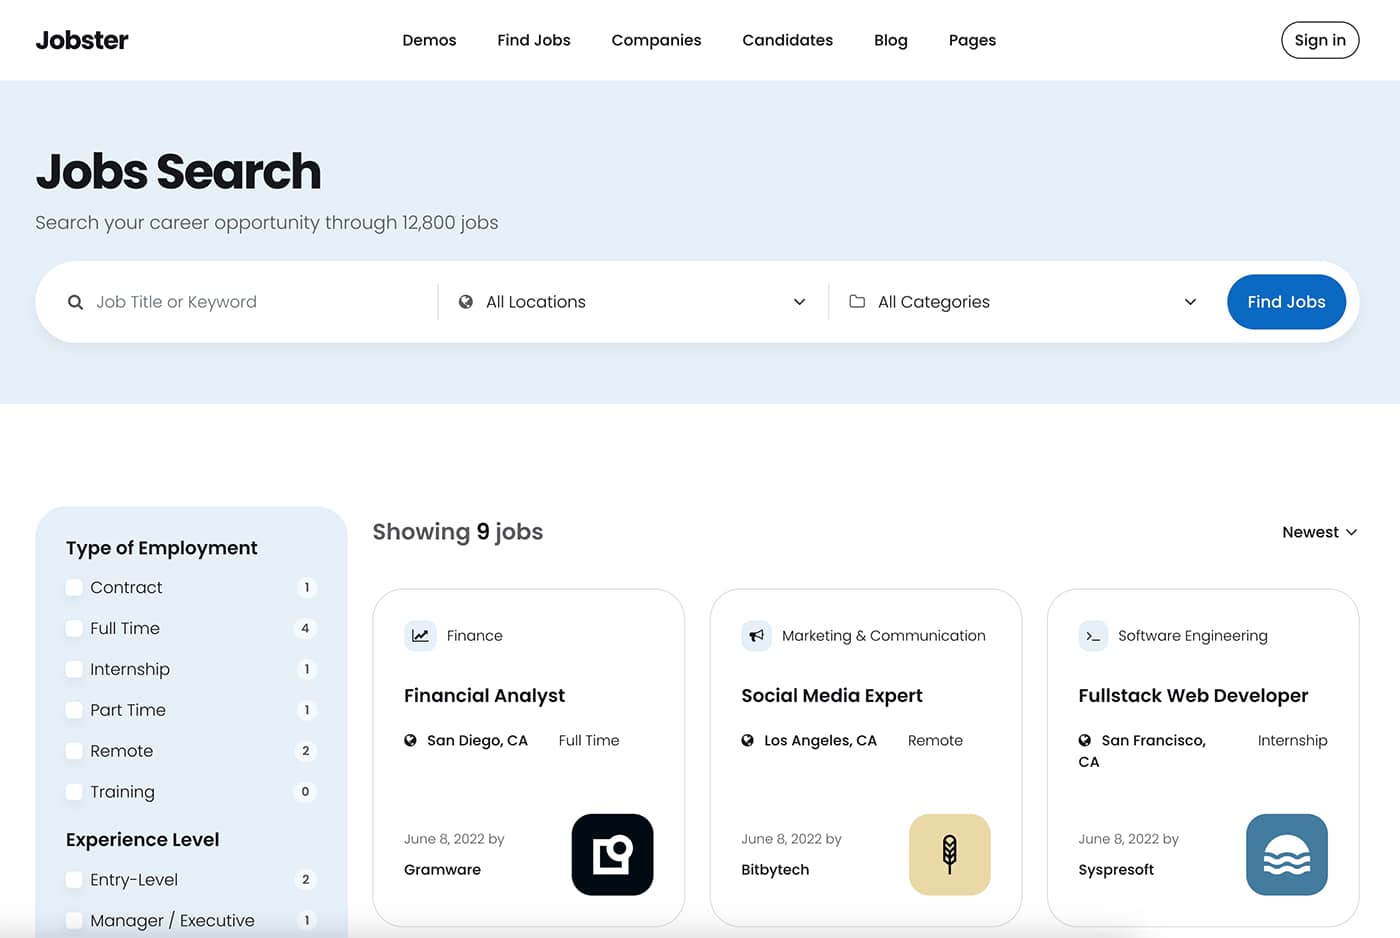 Jobster job search page front-end